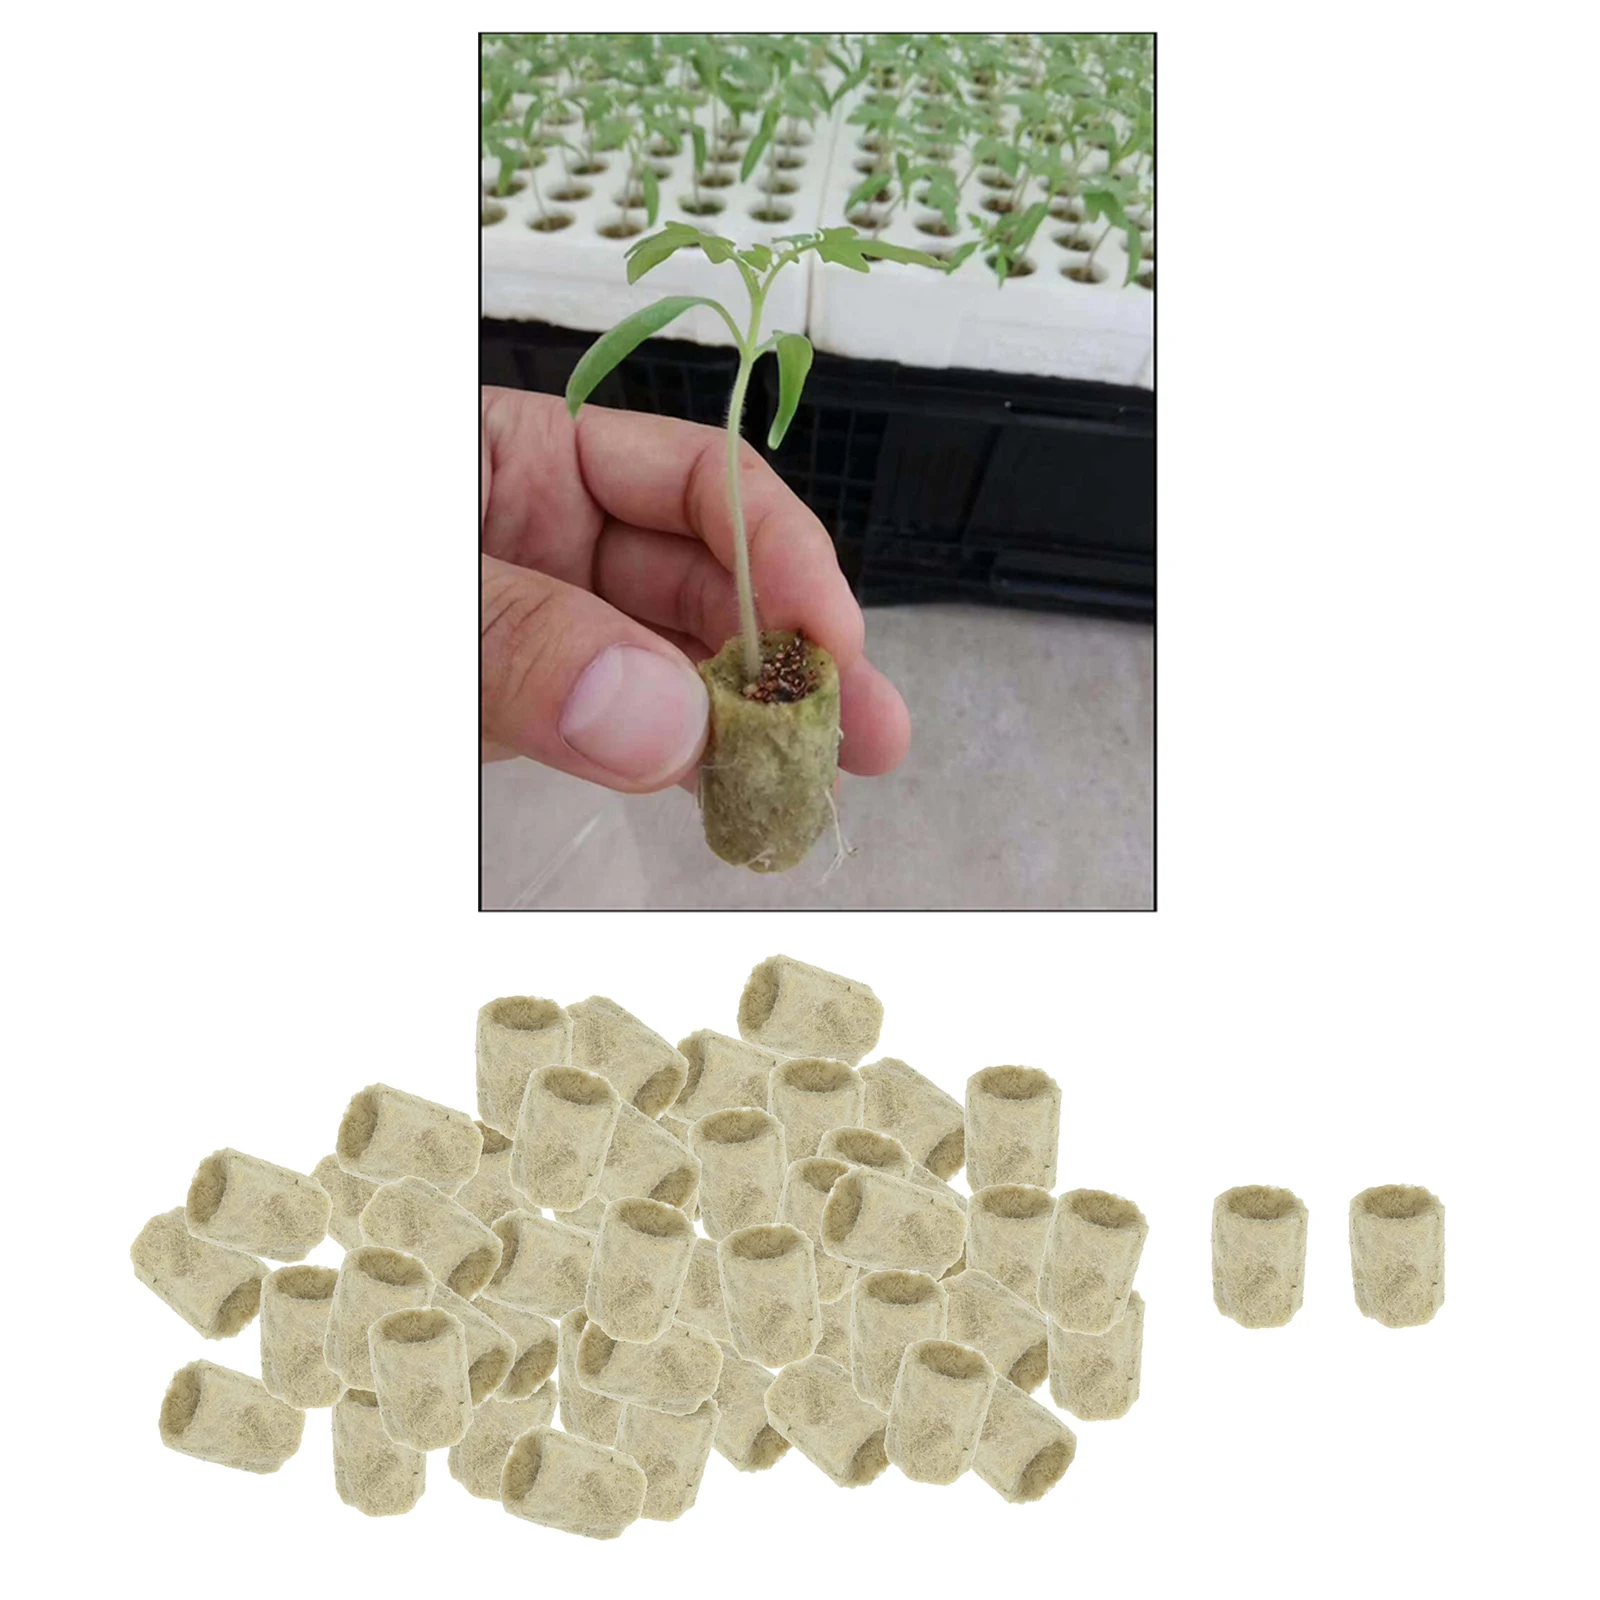  Blocks, 50 Pcs Gardening  Hydroponics Cubes Tray, for Outdoor  Planting Seedling 